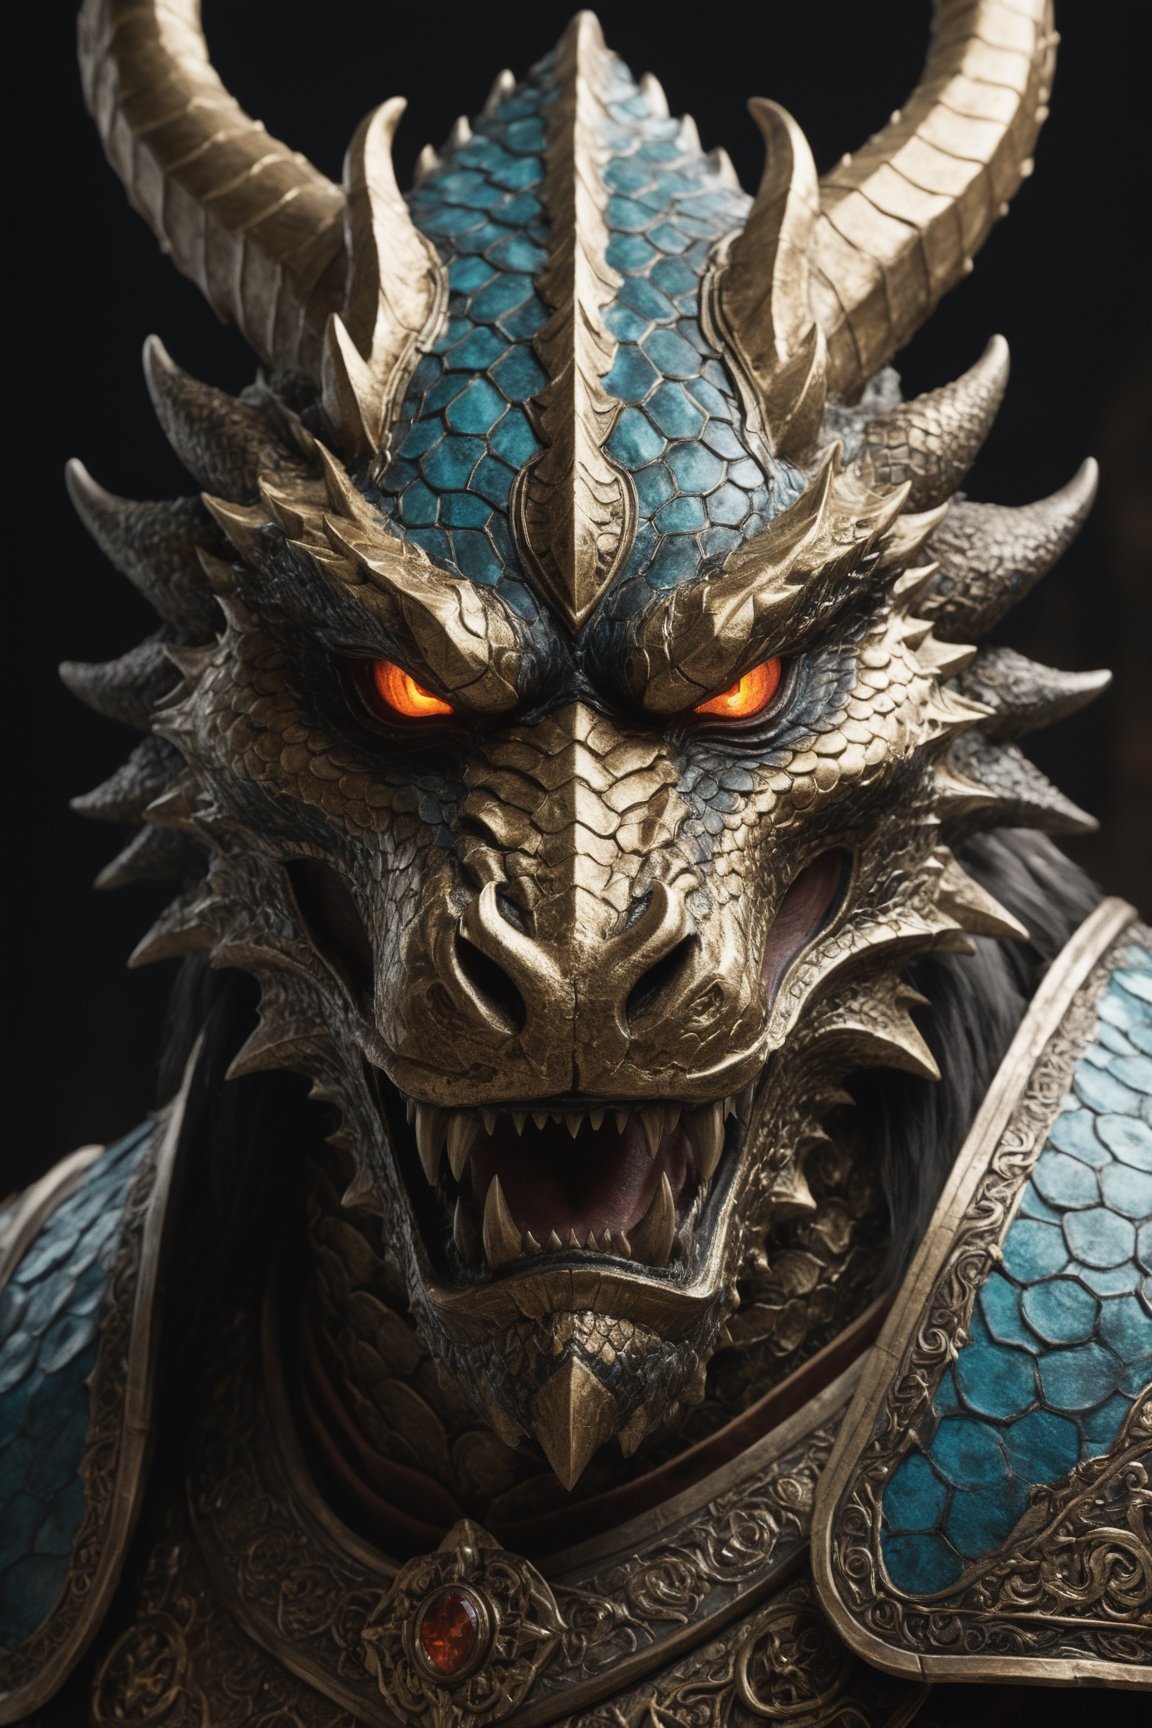 Photorealistic Images prompt structure:
"A realistic photograph capturing the visage of Bolas, the powerful dragon planeswalker, and the Amulet of Vigor. The photograph showcases the intricate details of the Visage of Bolas, with its menacing expression and scale-like texture. The Amulet of Vigor is captured in close-up, highlighting its ornate design and magical glow. The lighting accentuates the mystique of the artifacts, with a combination of soft and dramatic lighting creating depth and shadows. The camera captures the artifacts in a front view, allowing viewers to fully appreciate the details and craftsmanship. The lens used is a macro lens, enabling a high level of detail in the photograph. The image should have a resolution of 8K, immersing the viewers in the captivating world of these powerful relics."

Type of Image: Photograph
Subject Description: Visage of Bolas and Amulet of Vigor
Art Styles: Realistic
Art Inspirations: Menacing expression, scale-like texture, ornate design, magical glow
Camera: Front view
Shot: Intricate details, high level of detail, 8K resolution